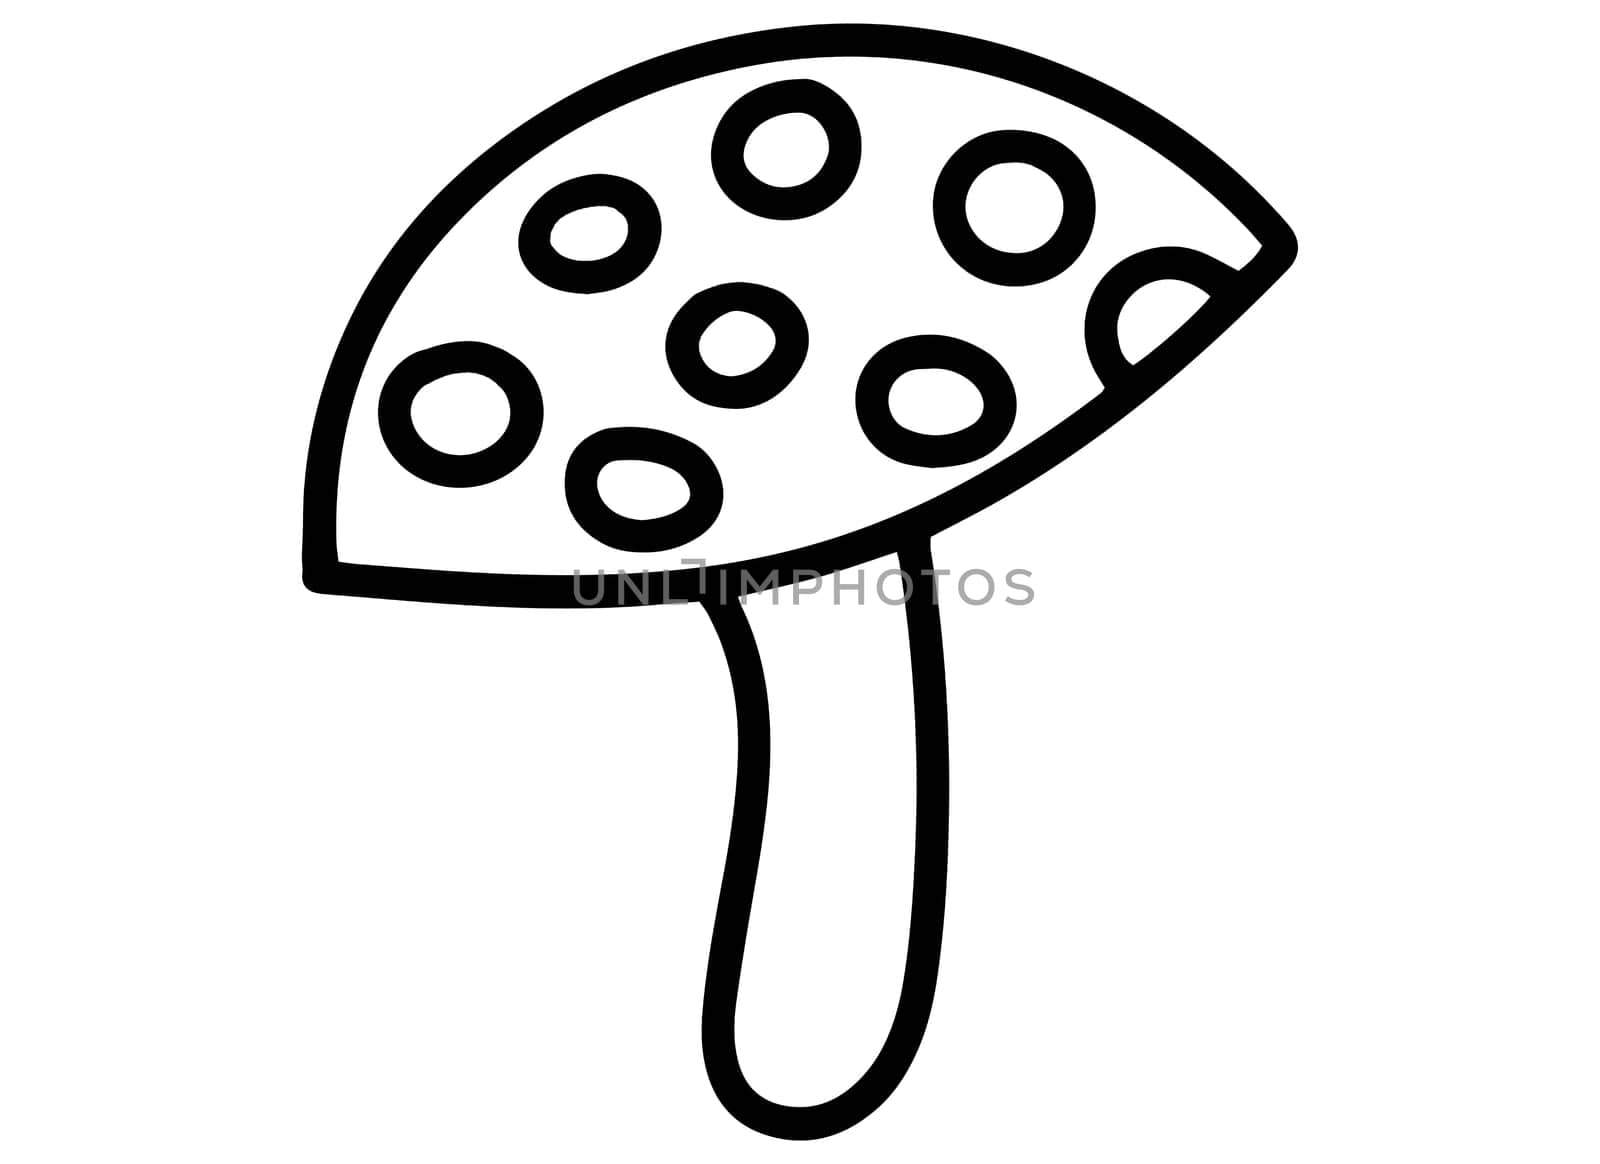 Printable Coloring Page for Kids. Black and White Mushroom Isolated Illustration. by Rina_Dozornaya